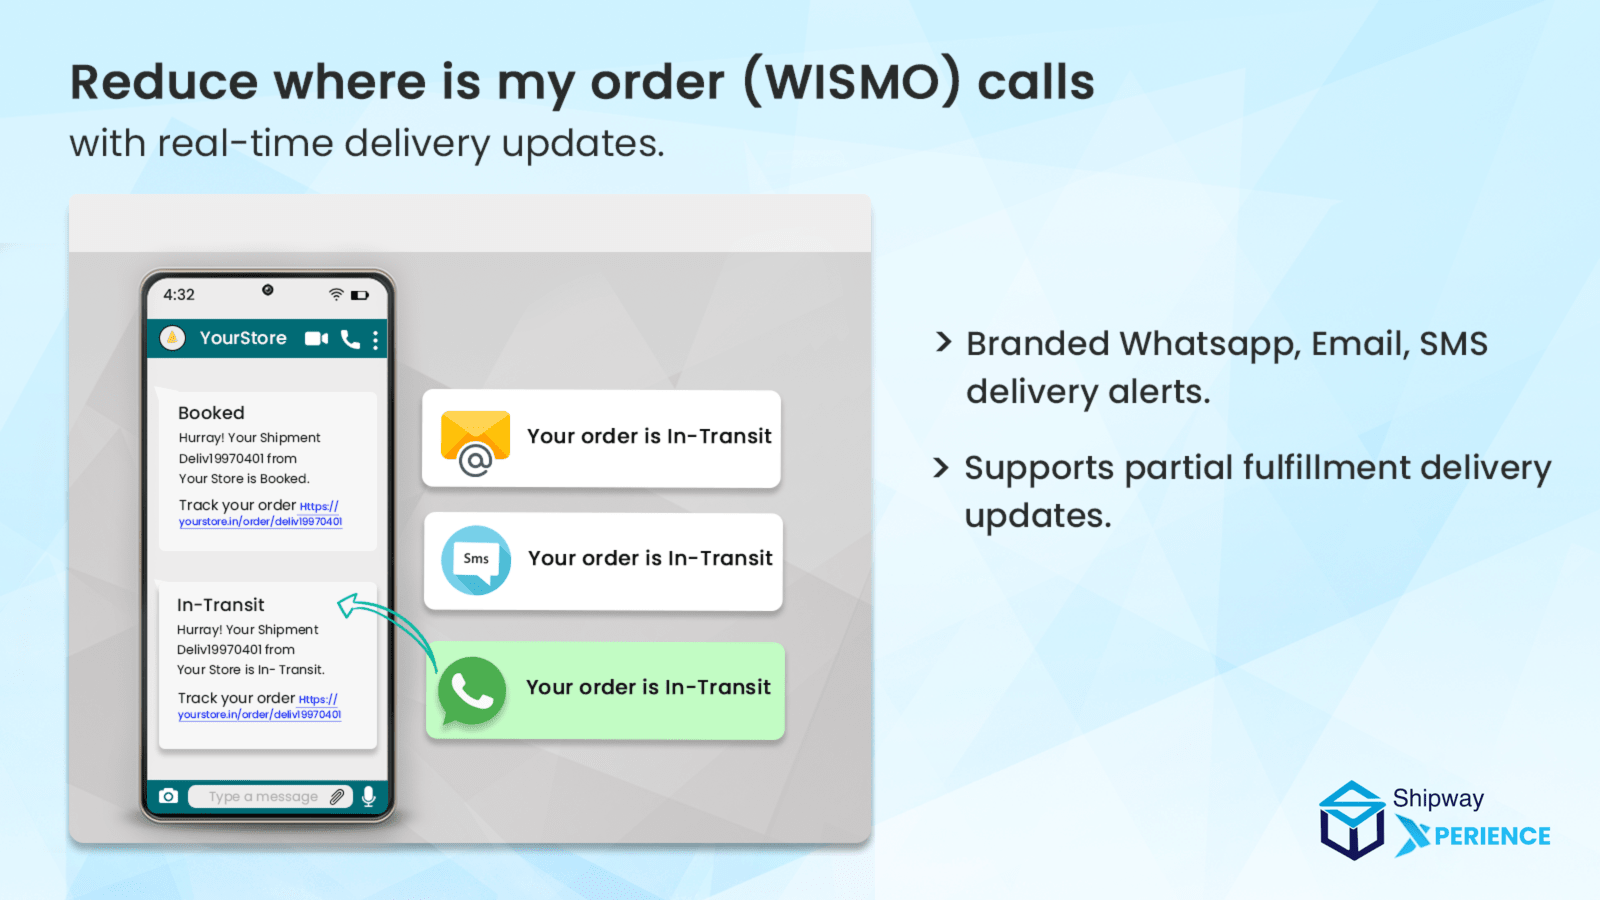 WhatsApp, SMS & Email Delivery Order Alerts